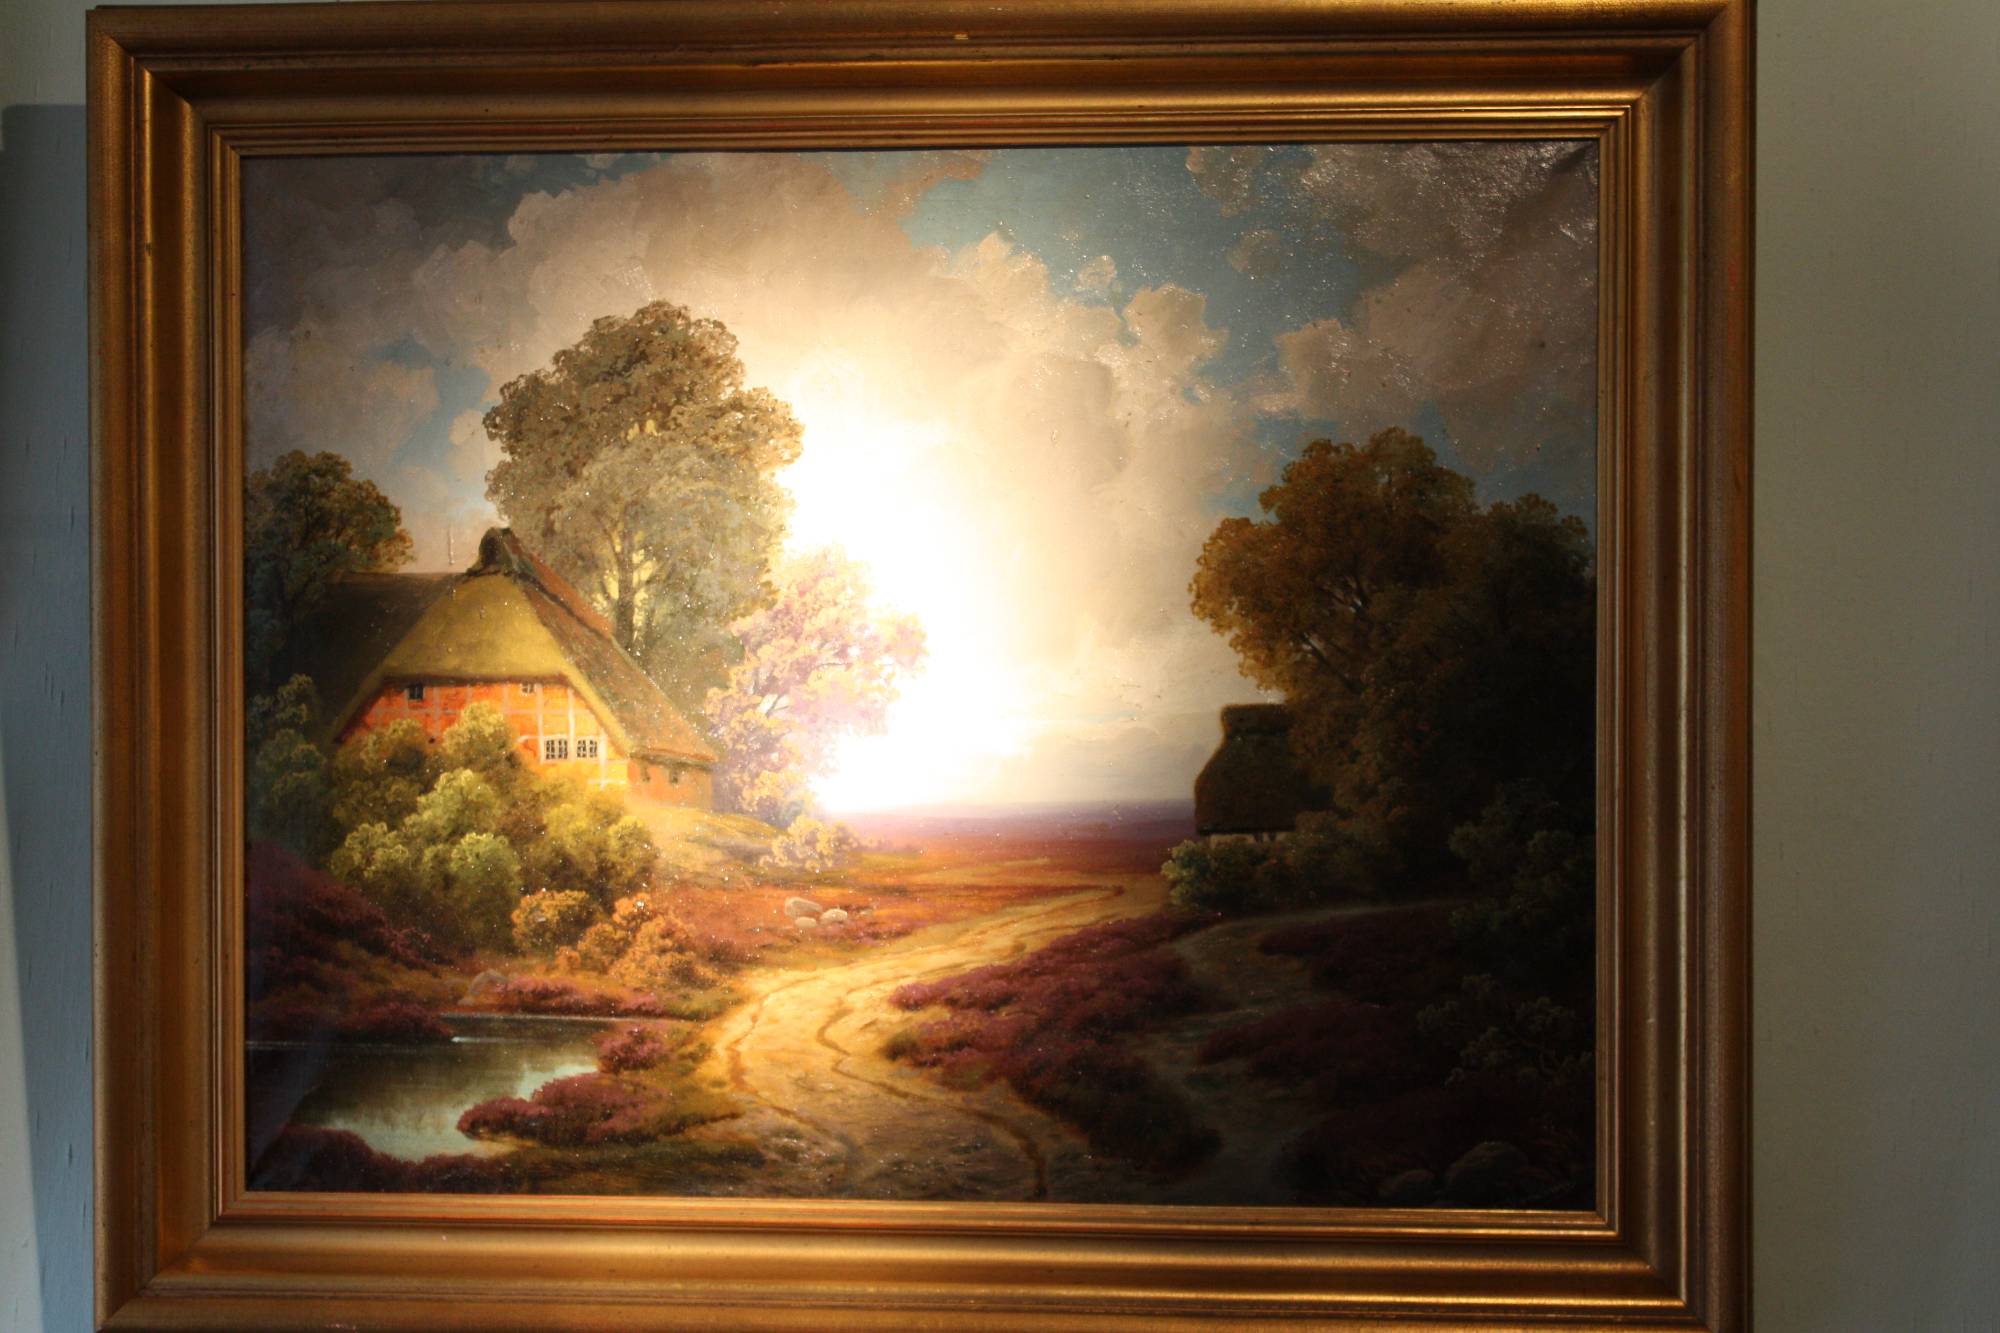 Large North German moorland with farm house landscape signed and dated oil painting, 'W. Mohrmann (19)25', Wilhelm Mohrmann